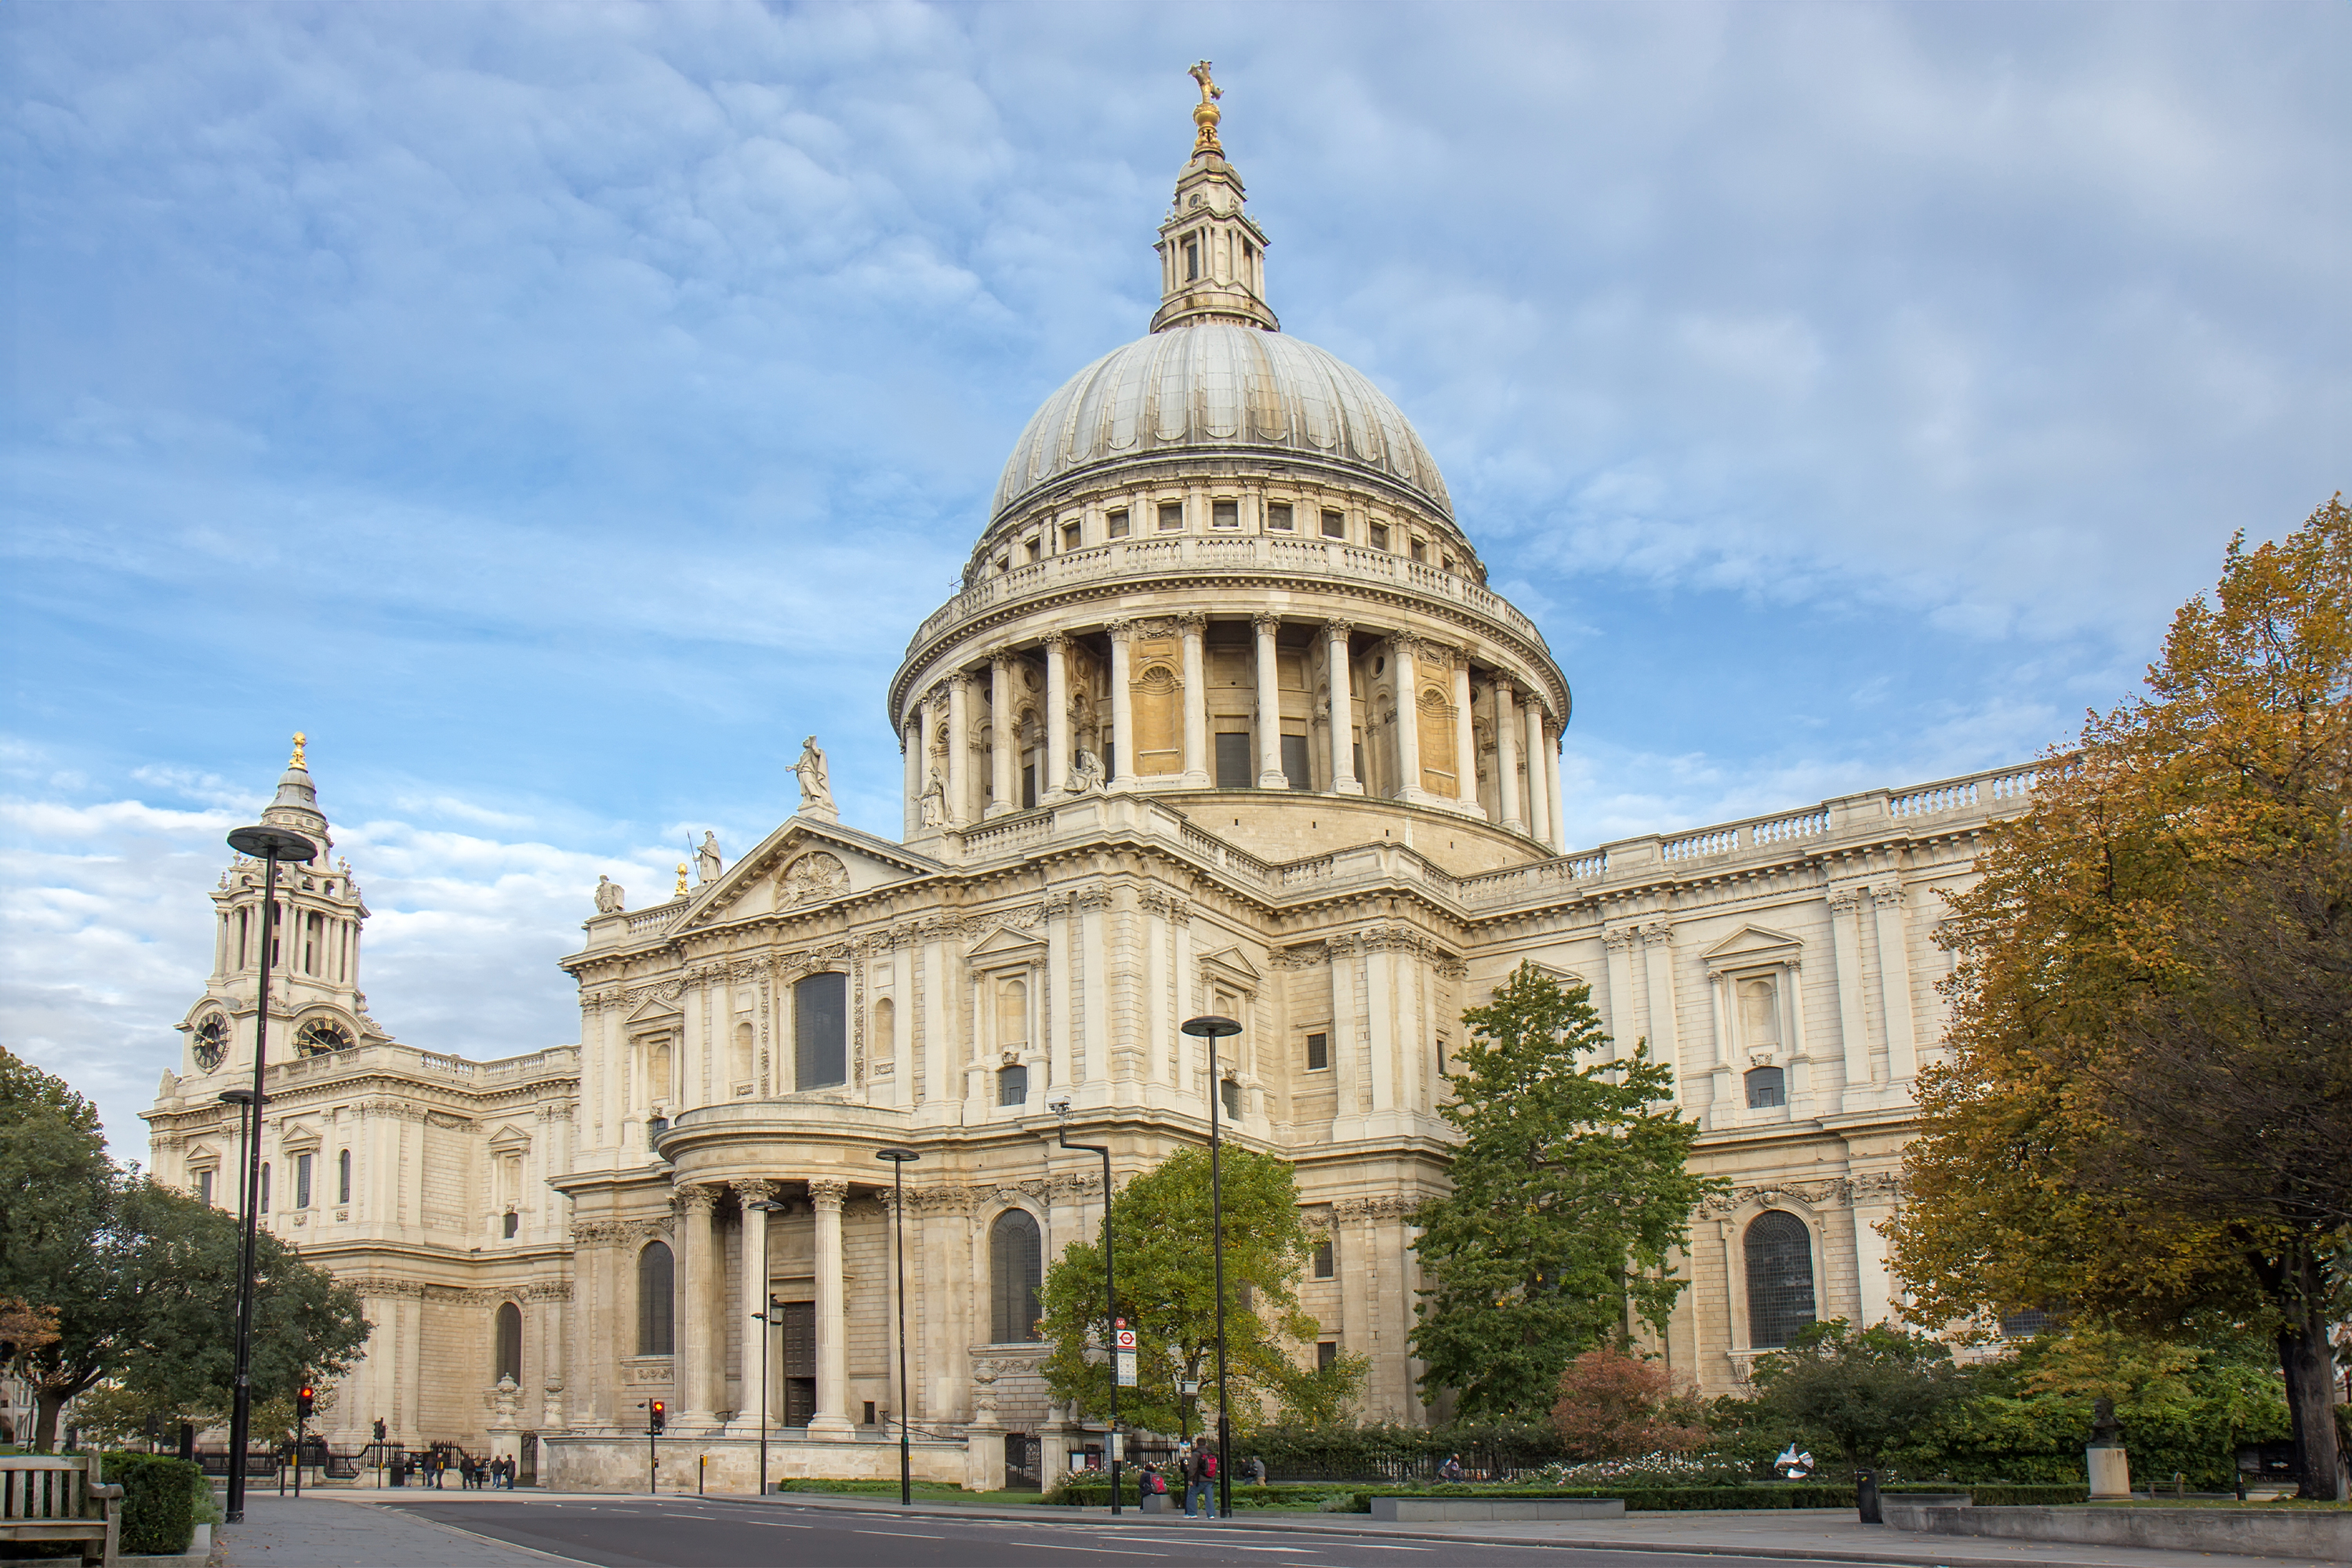 Stay up all night in the Hidden Library of St Paul’s Cathedral, now on Airbnb